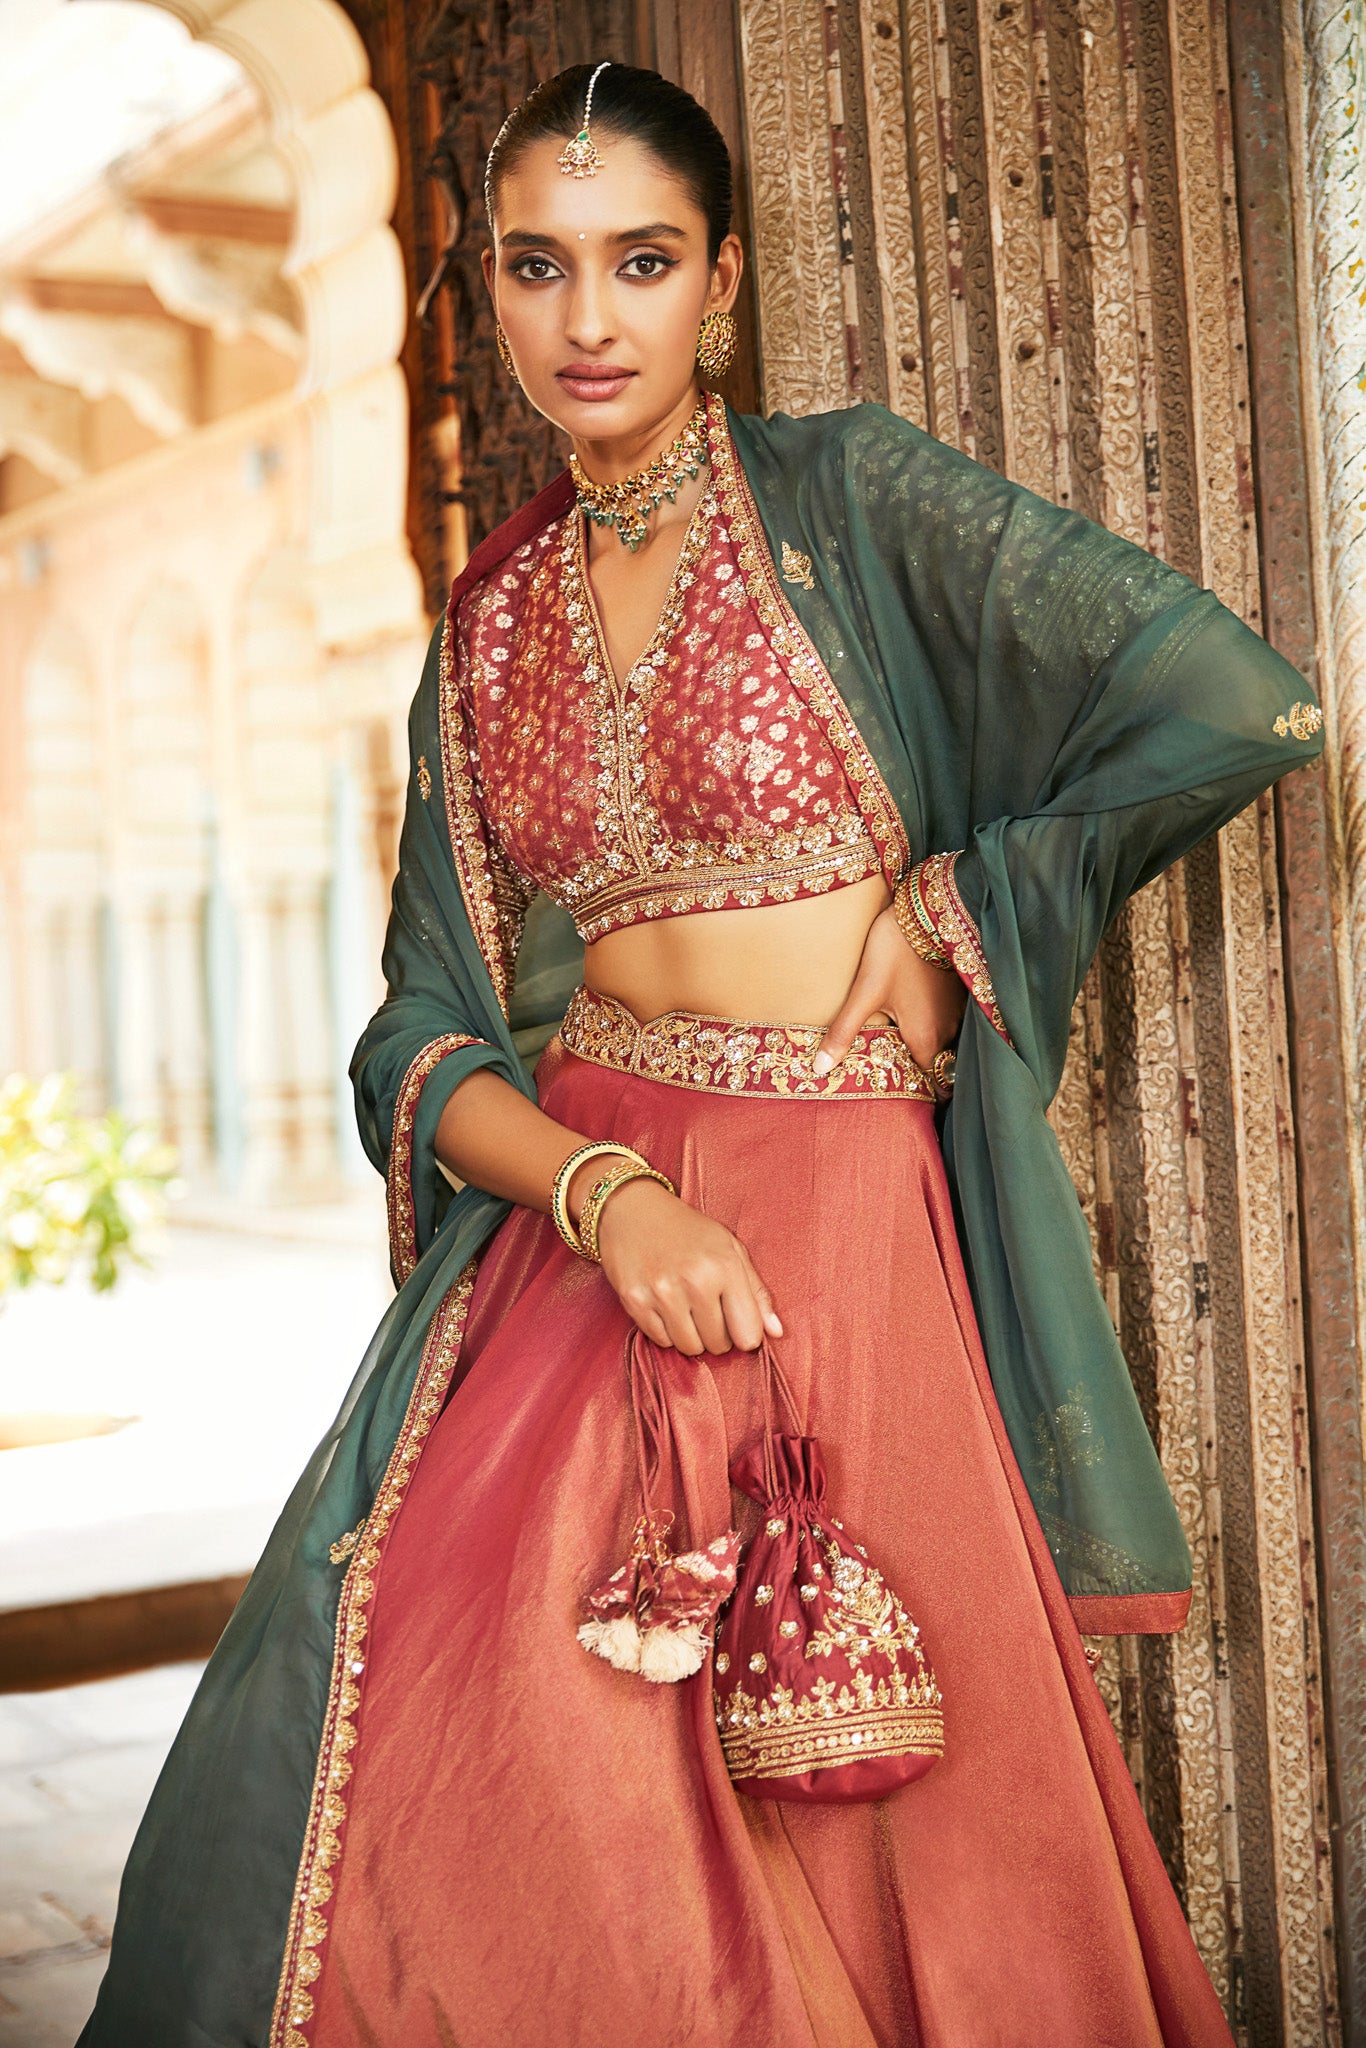 Gorgeous rust color embroidered tissue lehenga with dupatta is a perfect choice for a sangeet and engagement parties. The lehenga is adorned with beautiful embroidery and a contrasting dupatta. Shop designer Indian lehengas in USA from Pure Elegance.